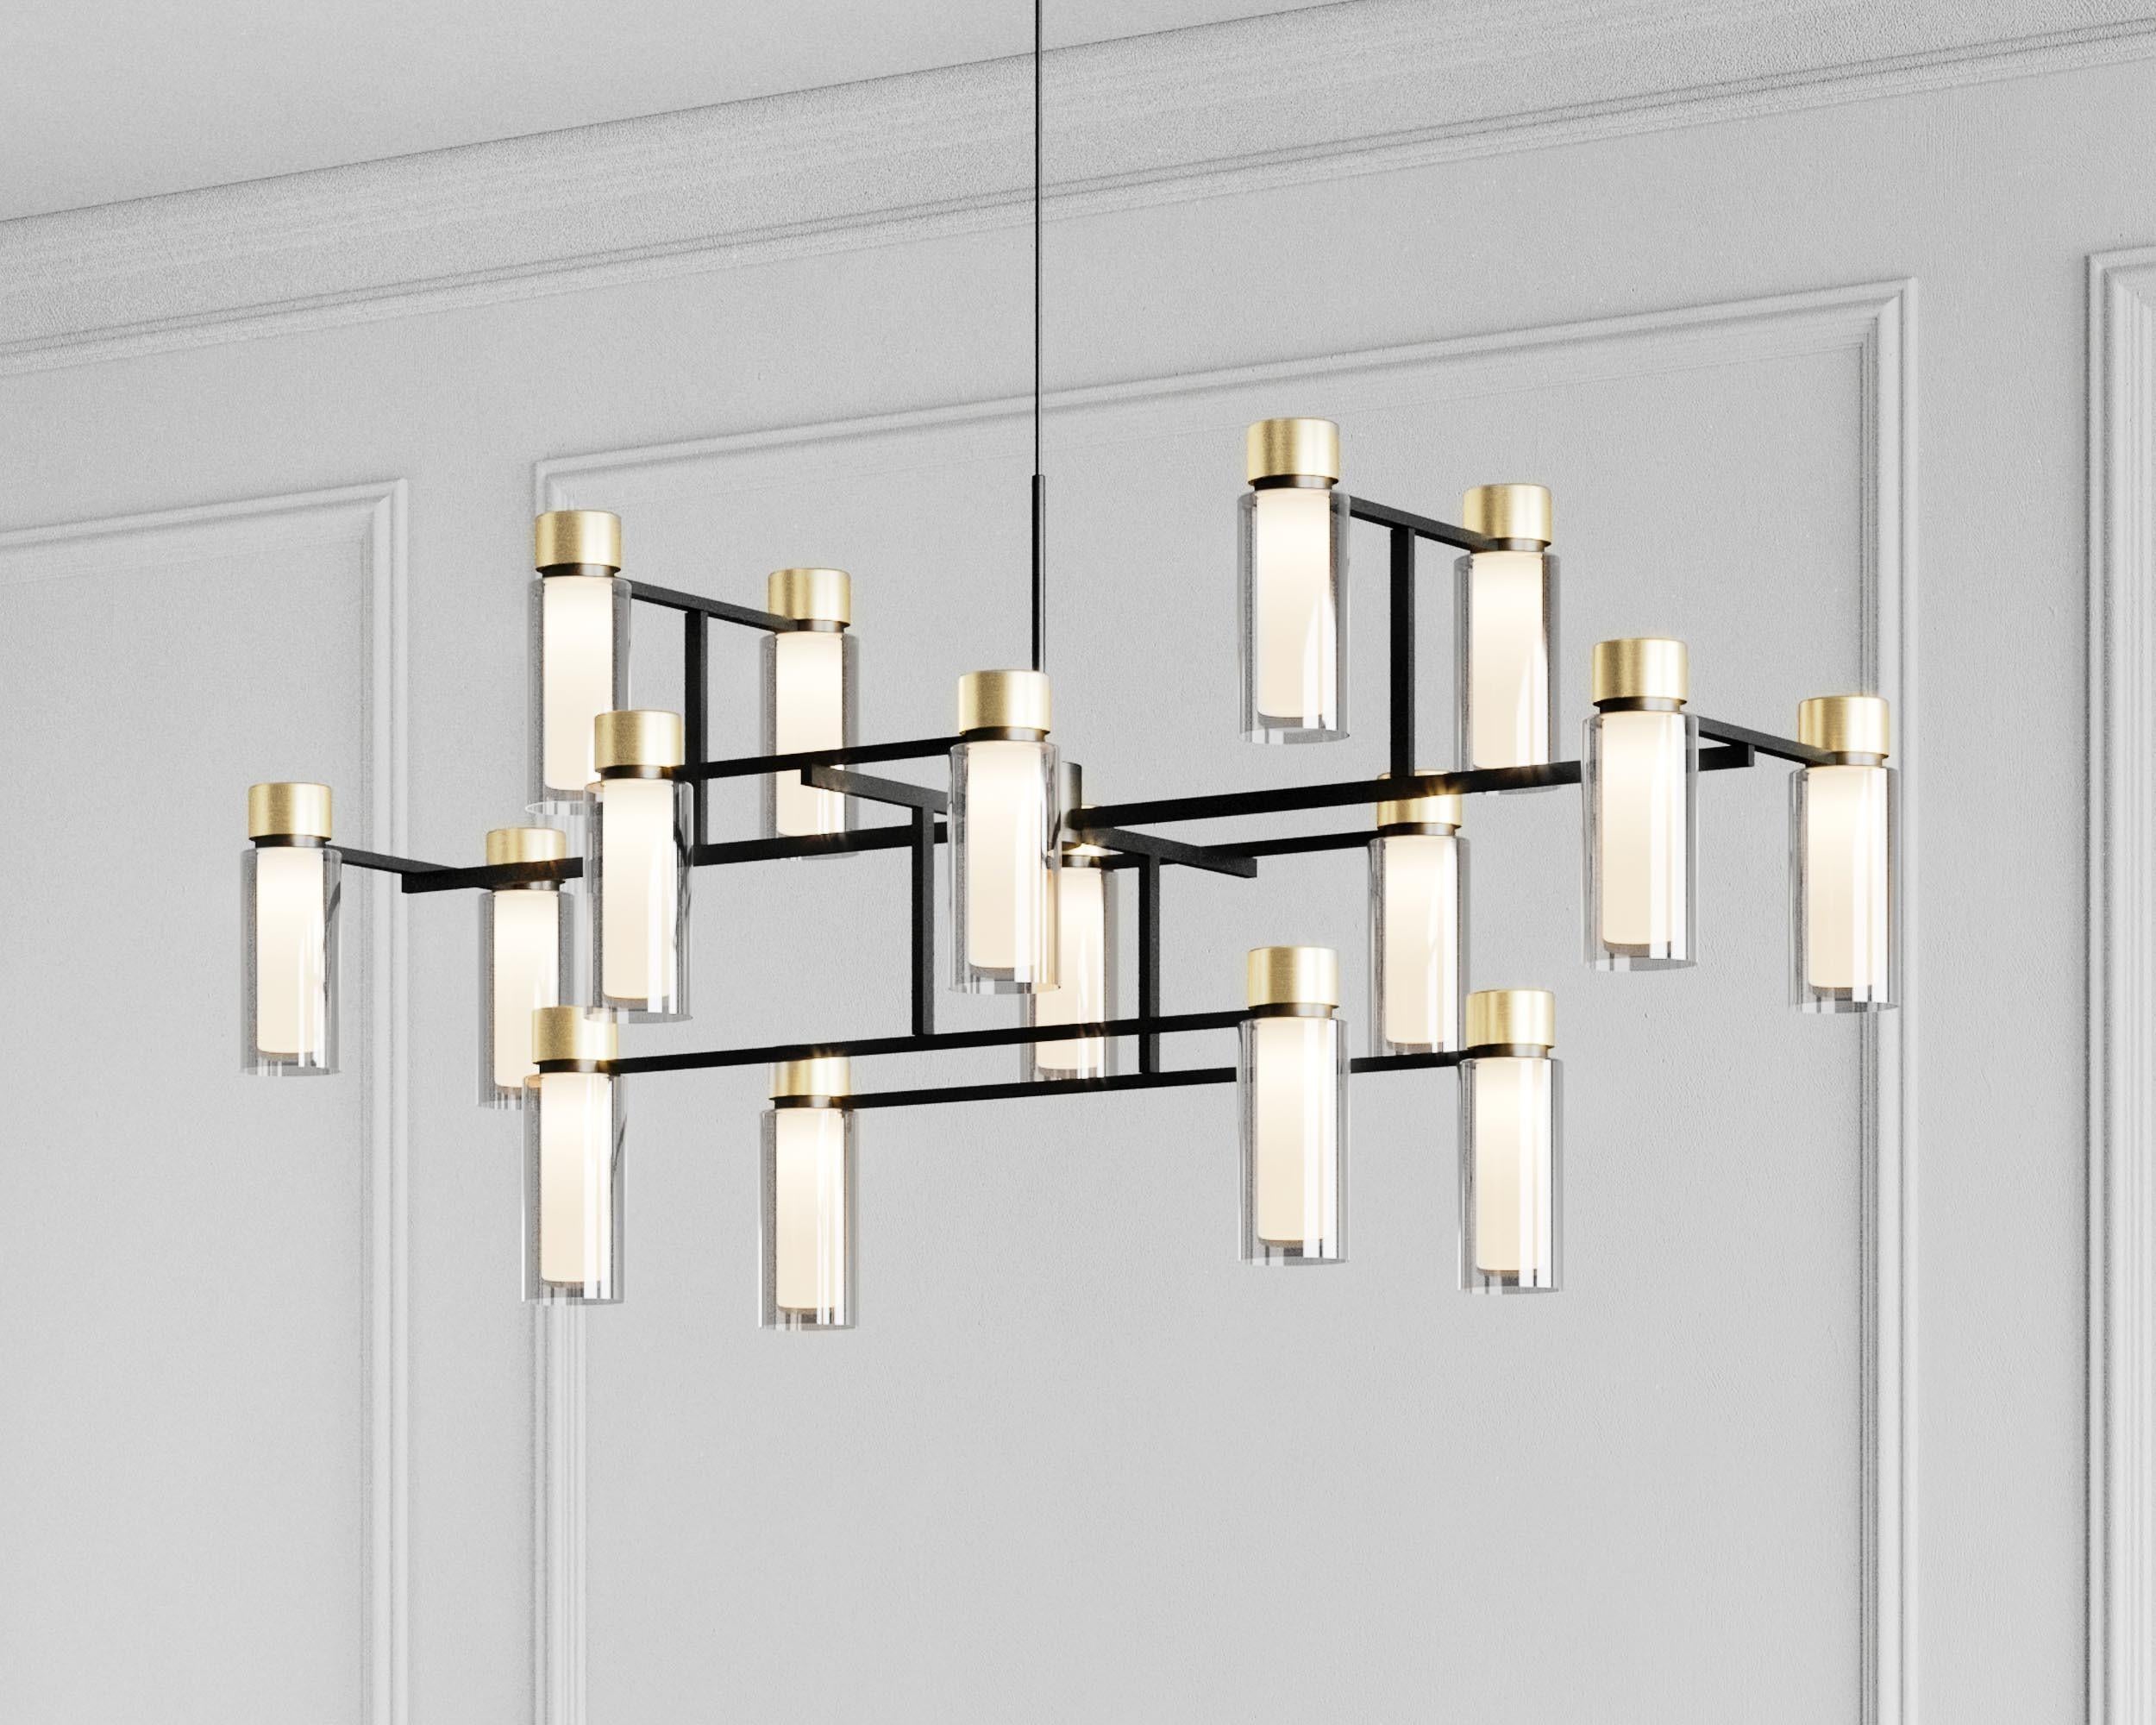 Chandelier Osman 560.17 by Corrado Dotti x TOOY
16 Lights
Compliant with USA electric system

Model shown:
Finish: Brushed brass
Color: Clear glass

Lighting source : 16 x E14 220/240V

Pendant: Cable length 60 / 90 cm. 

50s Inspired collection of